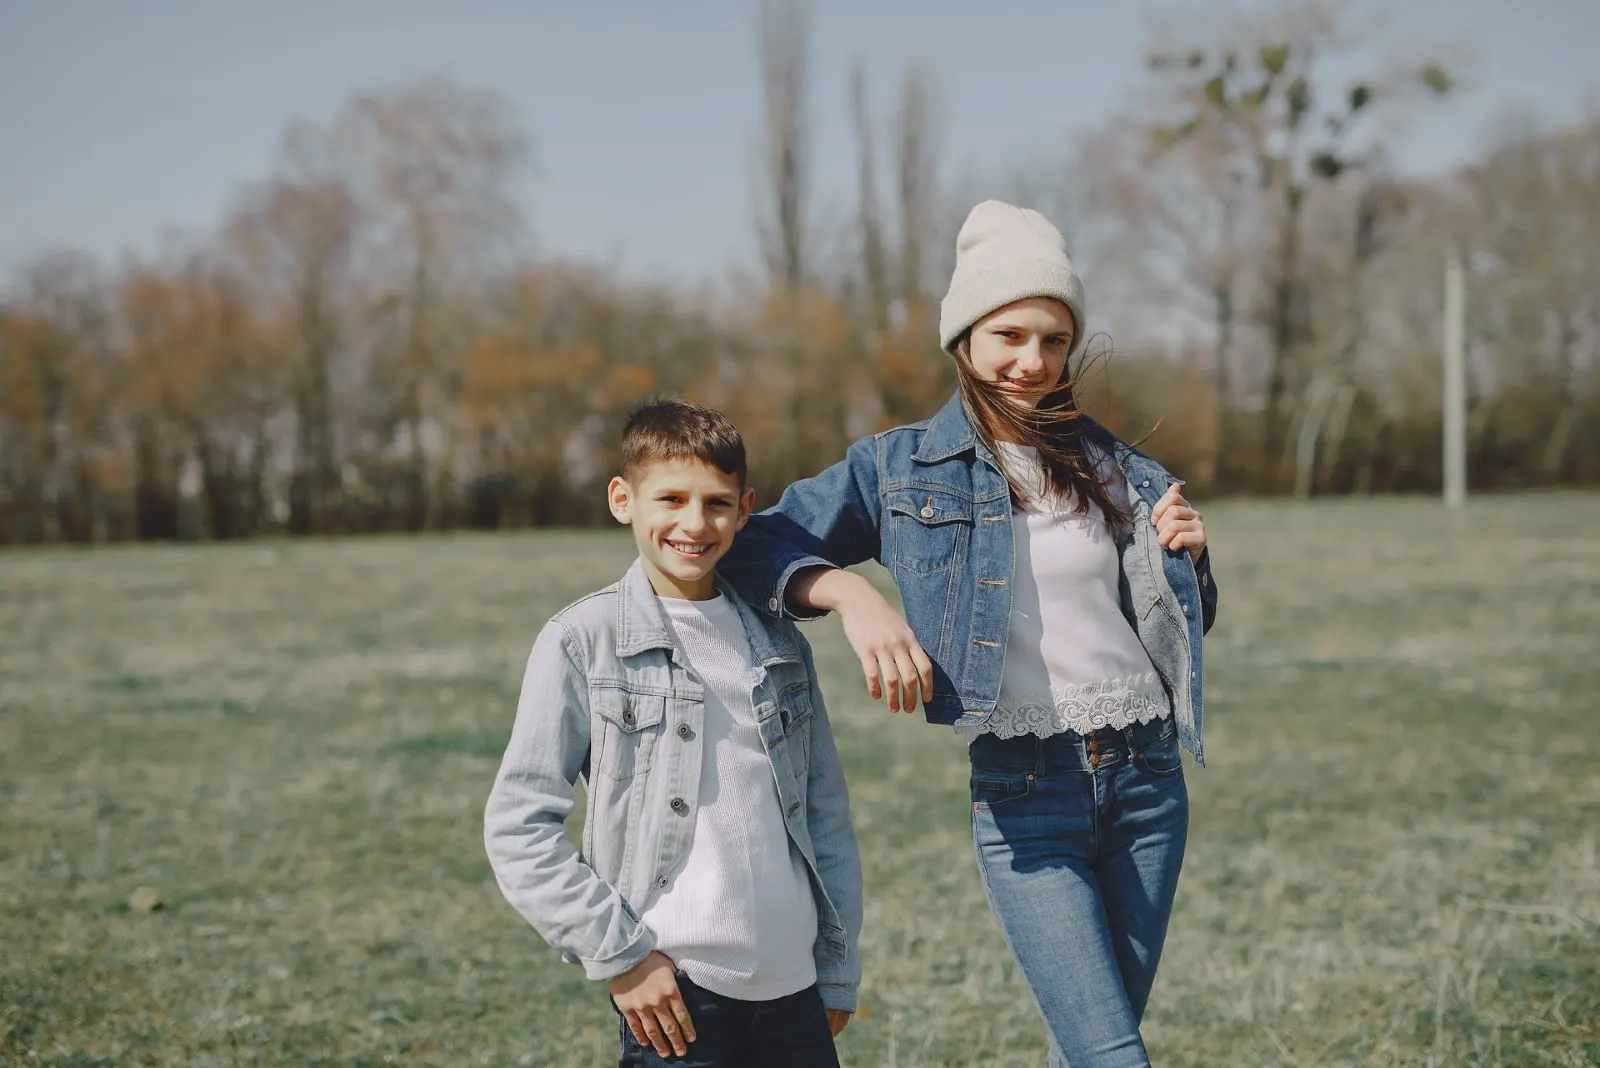 brother and sister in denim jackets standing on grass